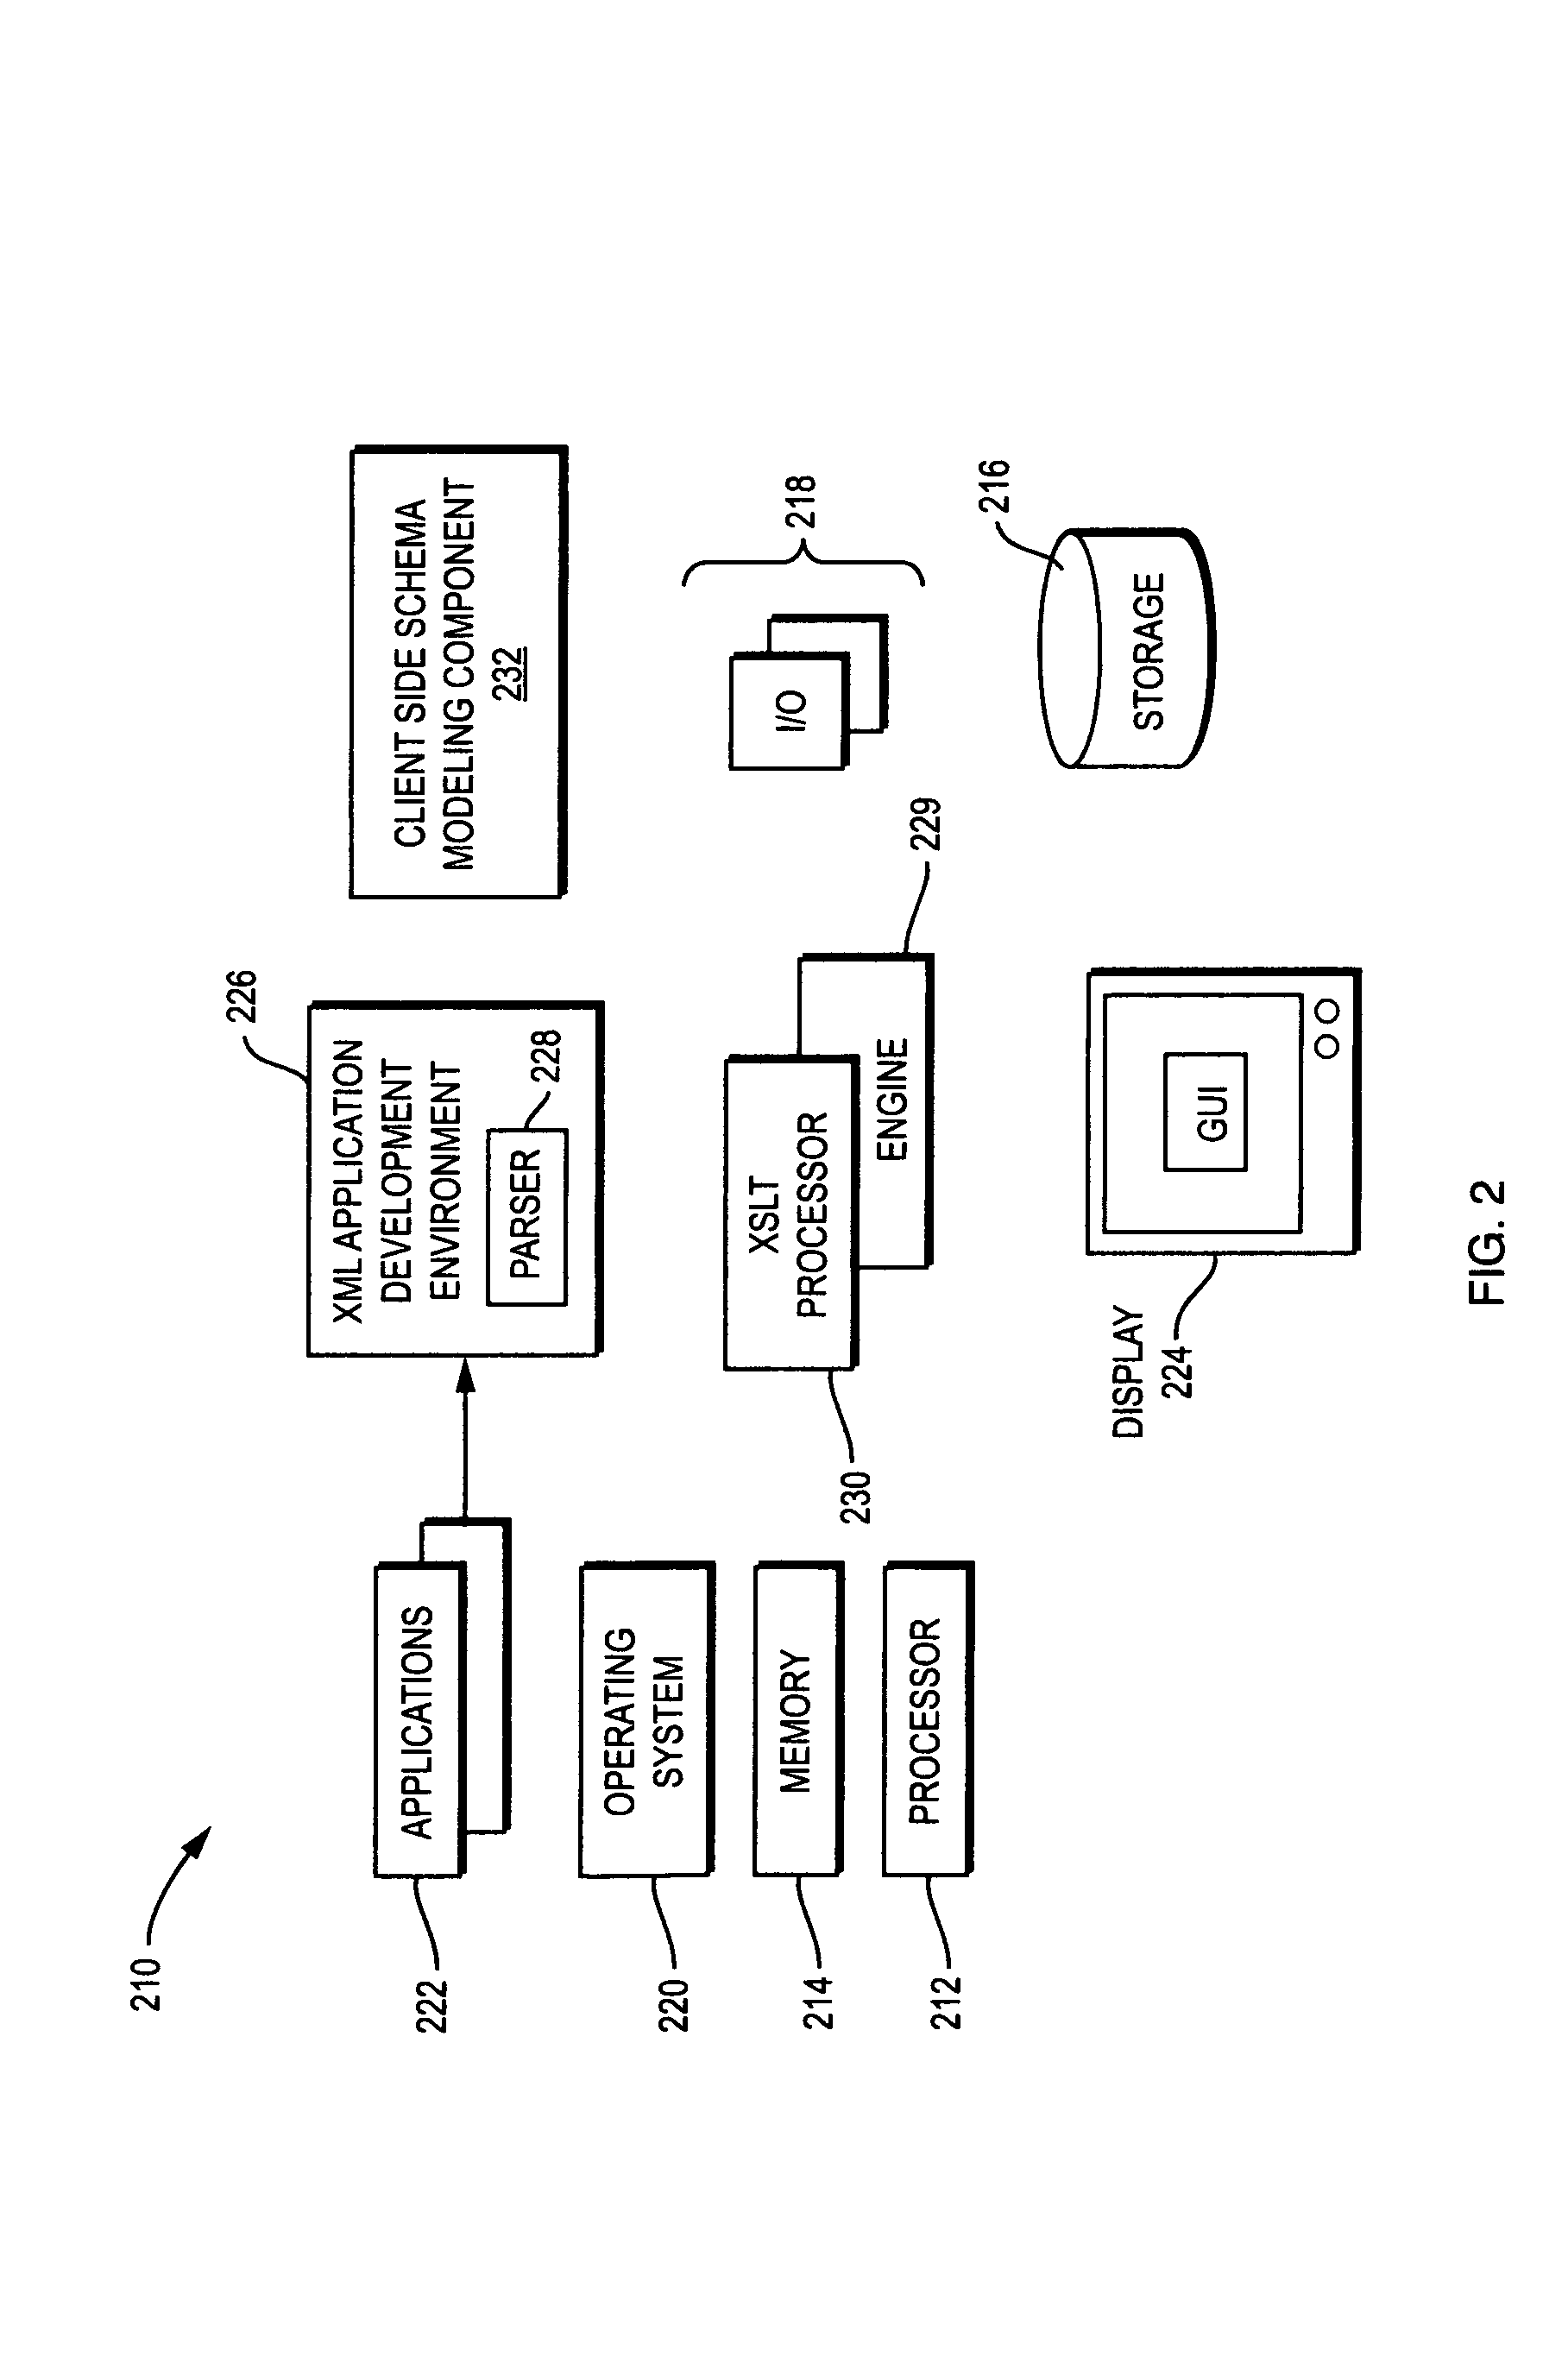 System and method for modeling and managing enterprise architecture data and content models and their relationships